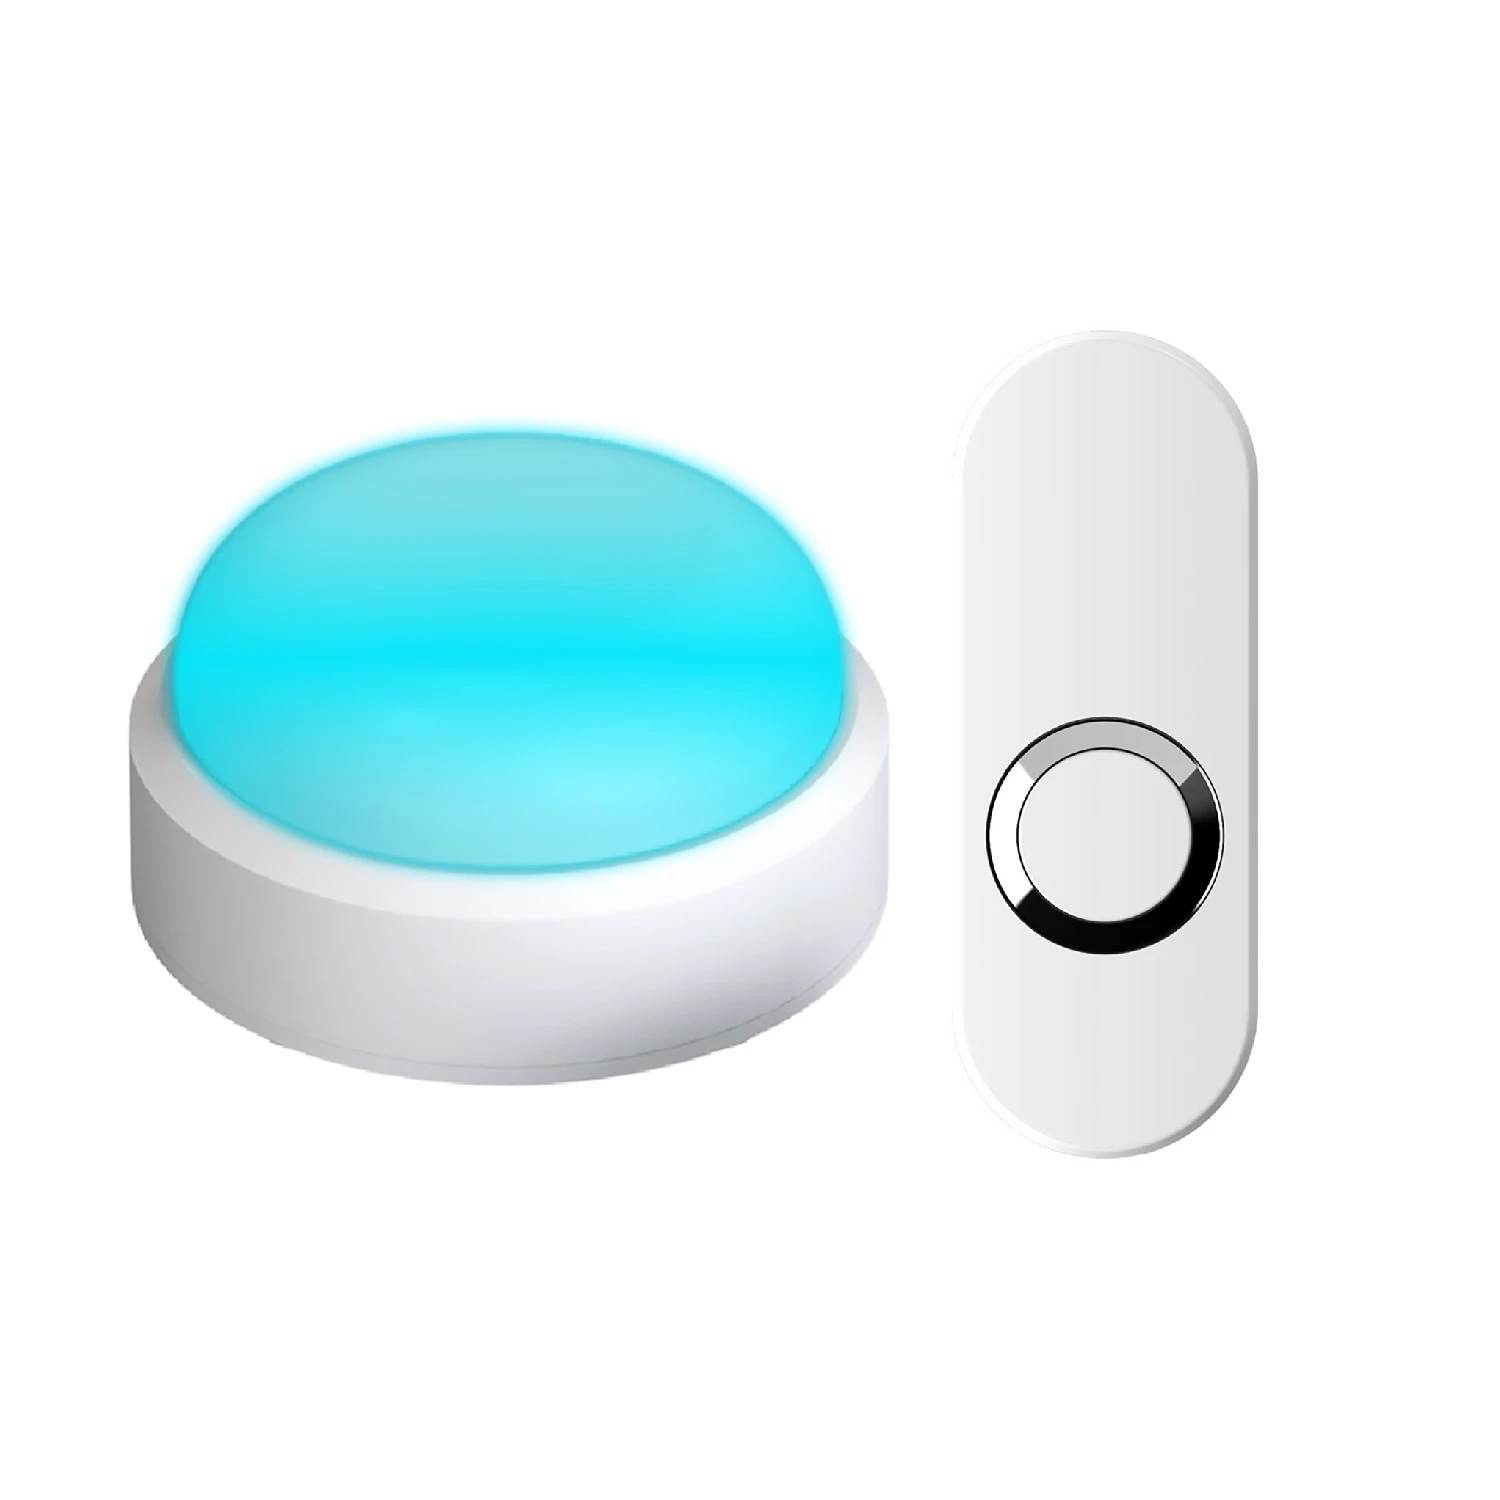 Wireless 110dB Strobe 7 Color Flash LED Light Doorbell for Deaf Hearing Impaired People